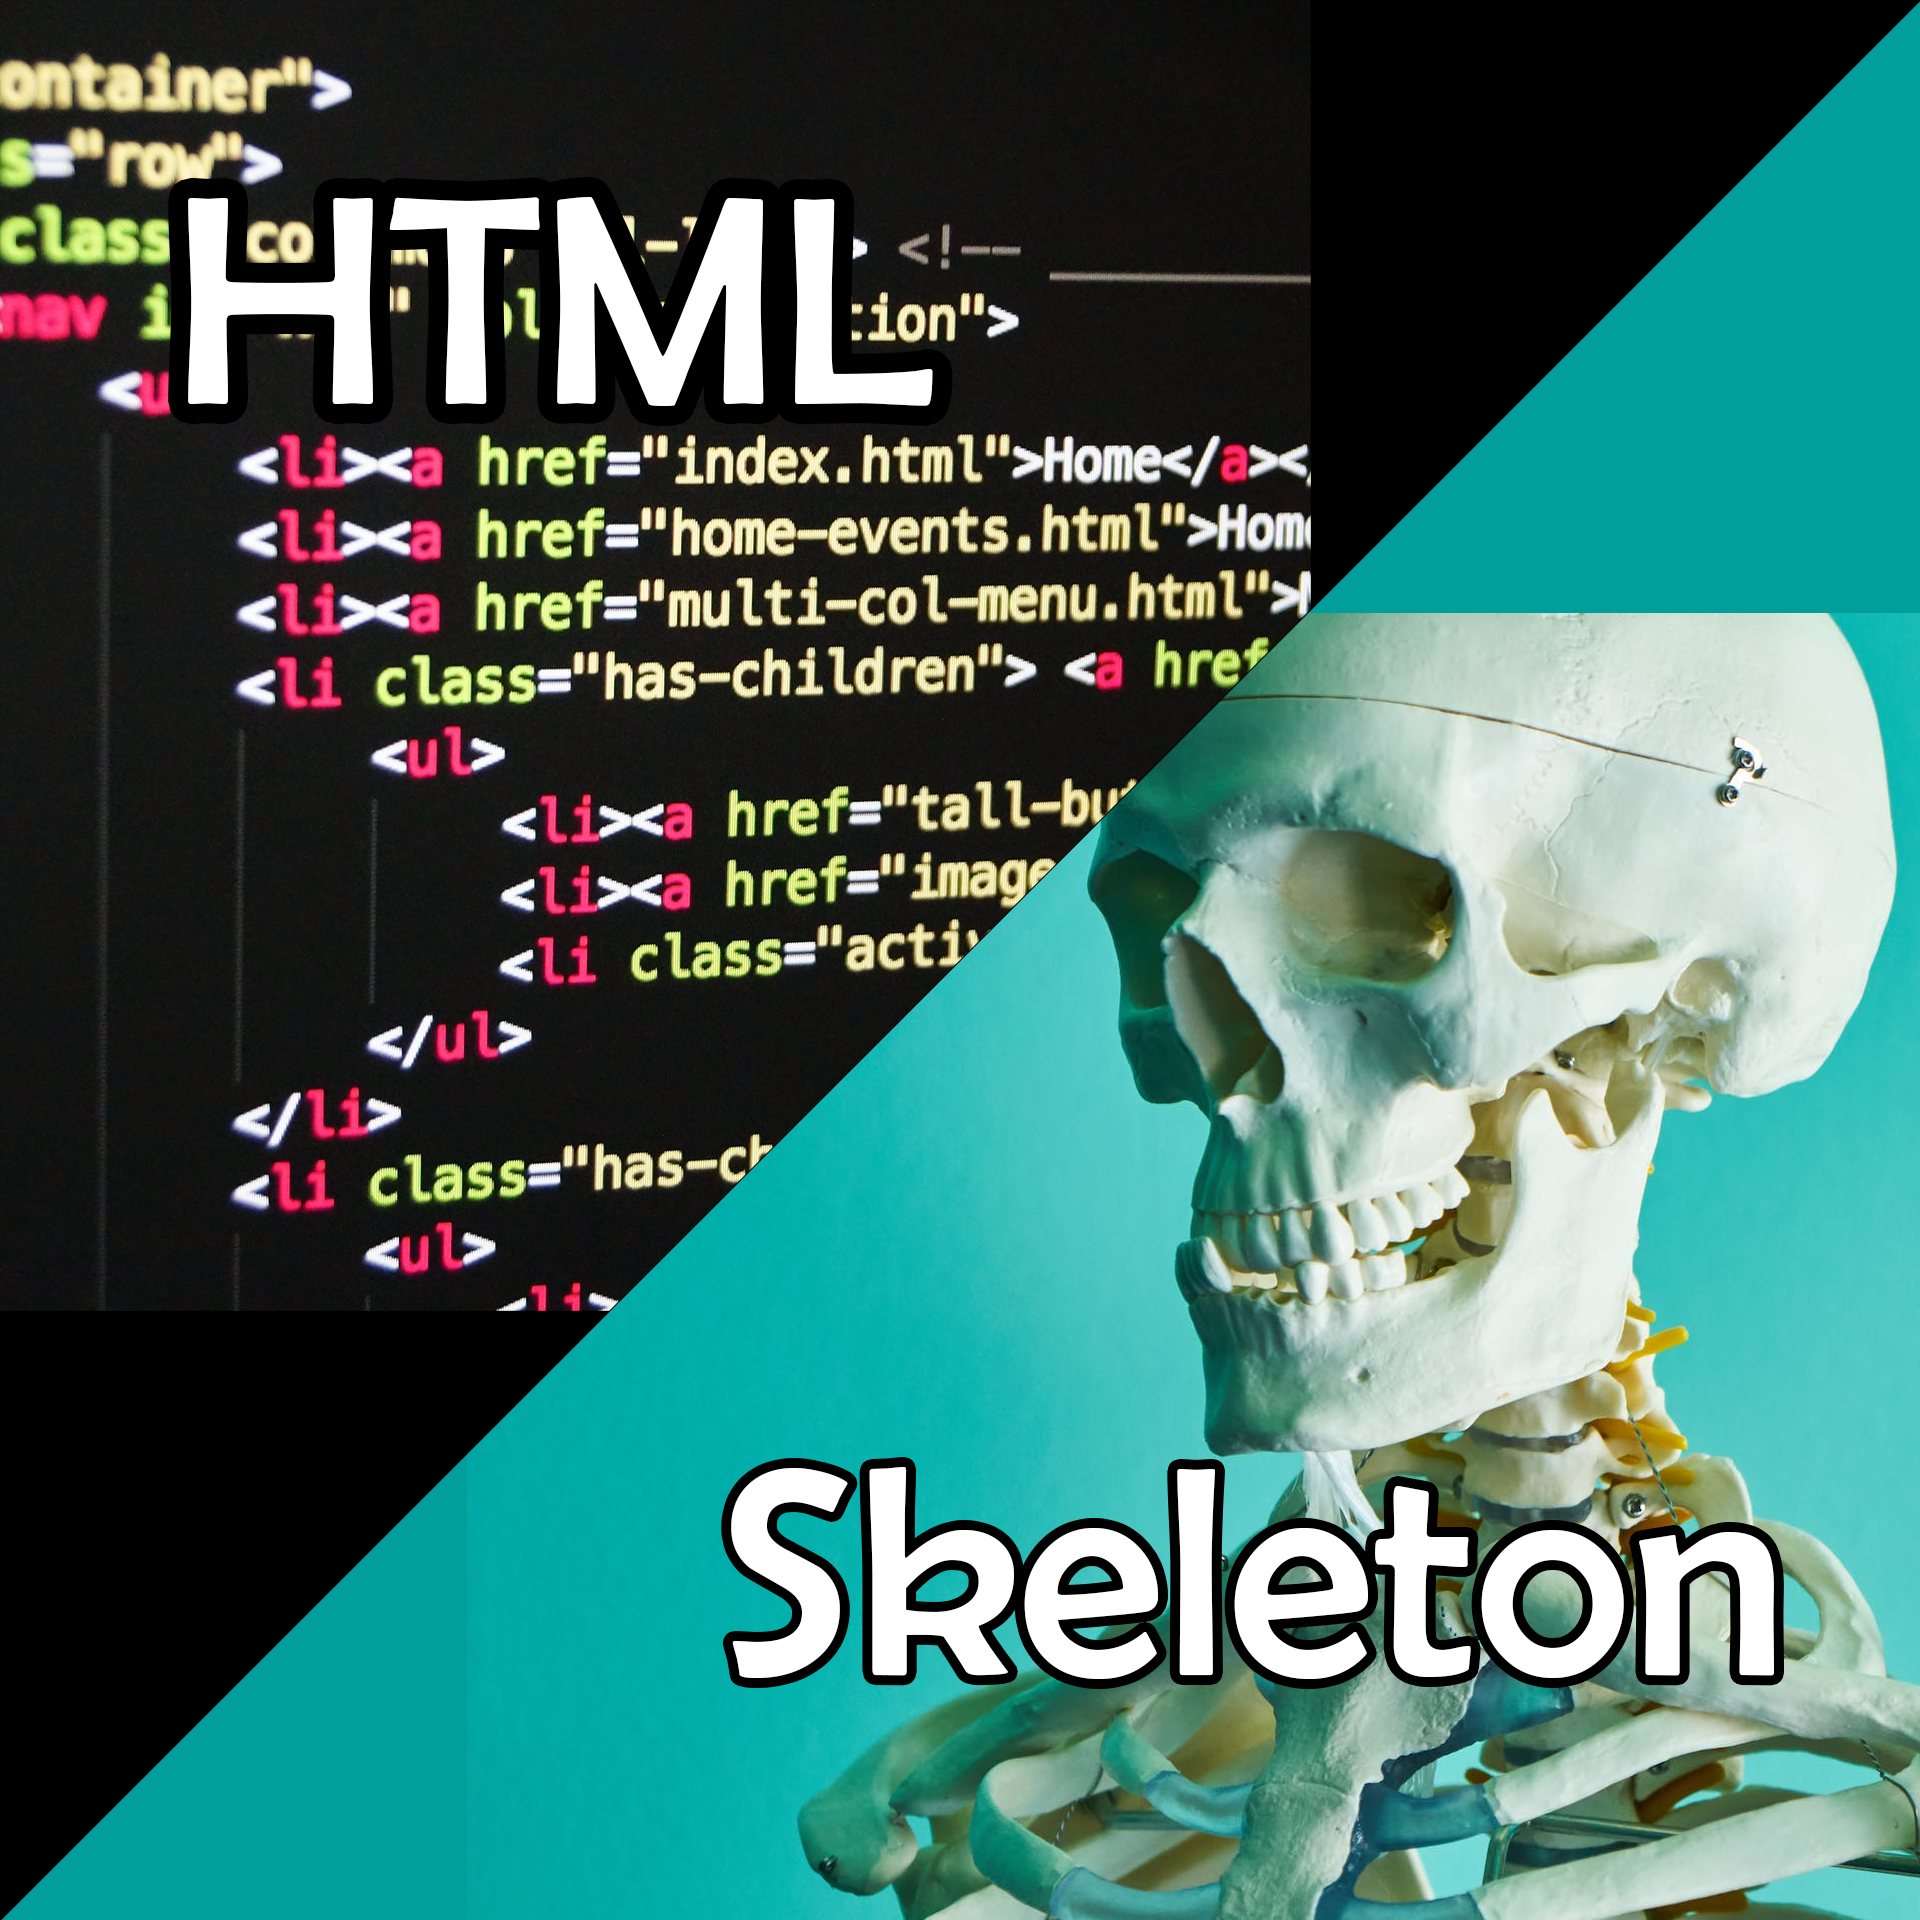 HTML is the skeleton of the web page